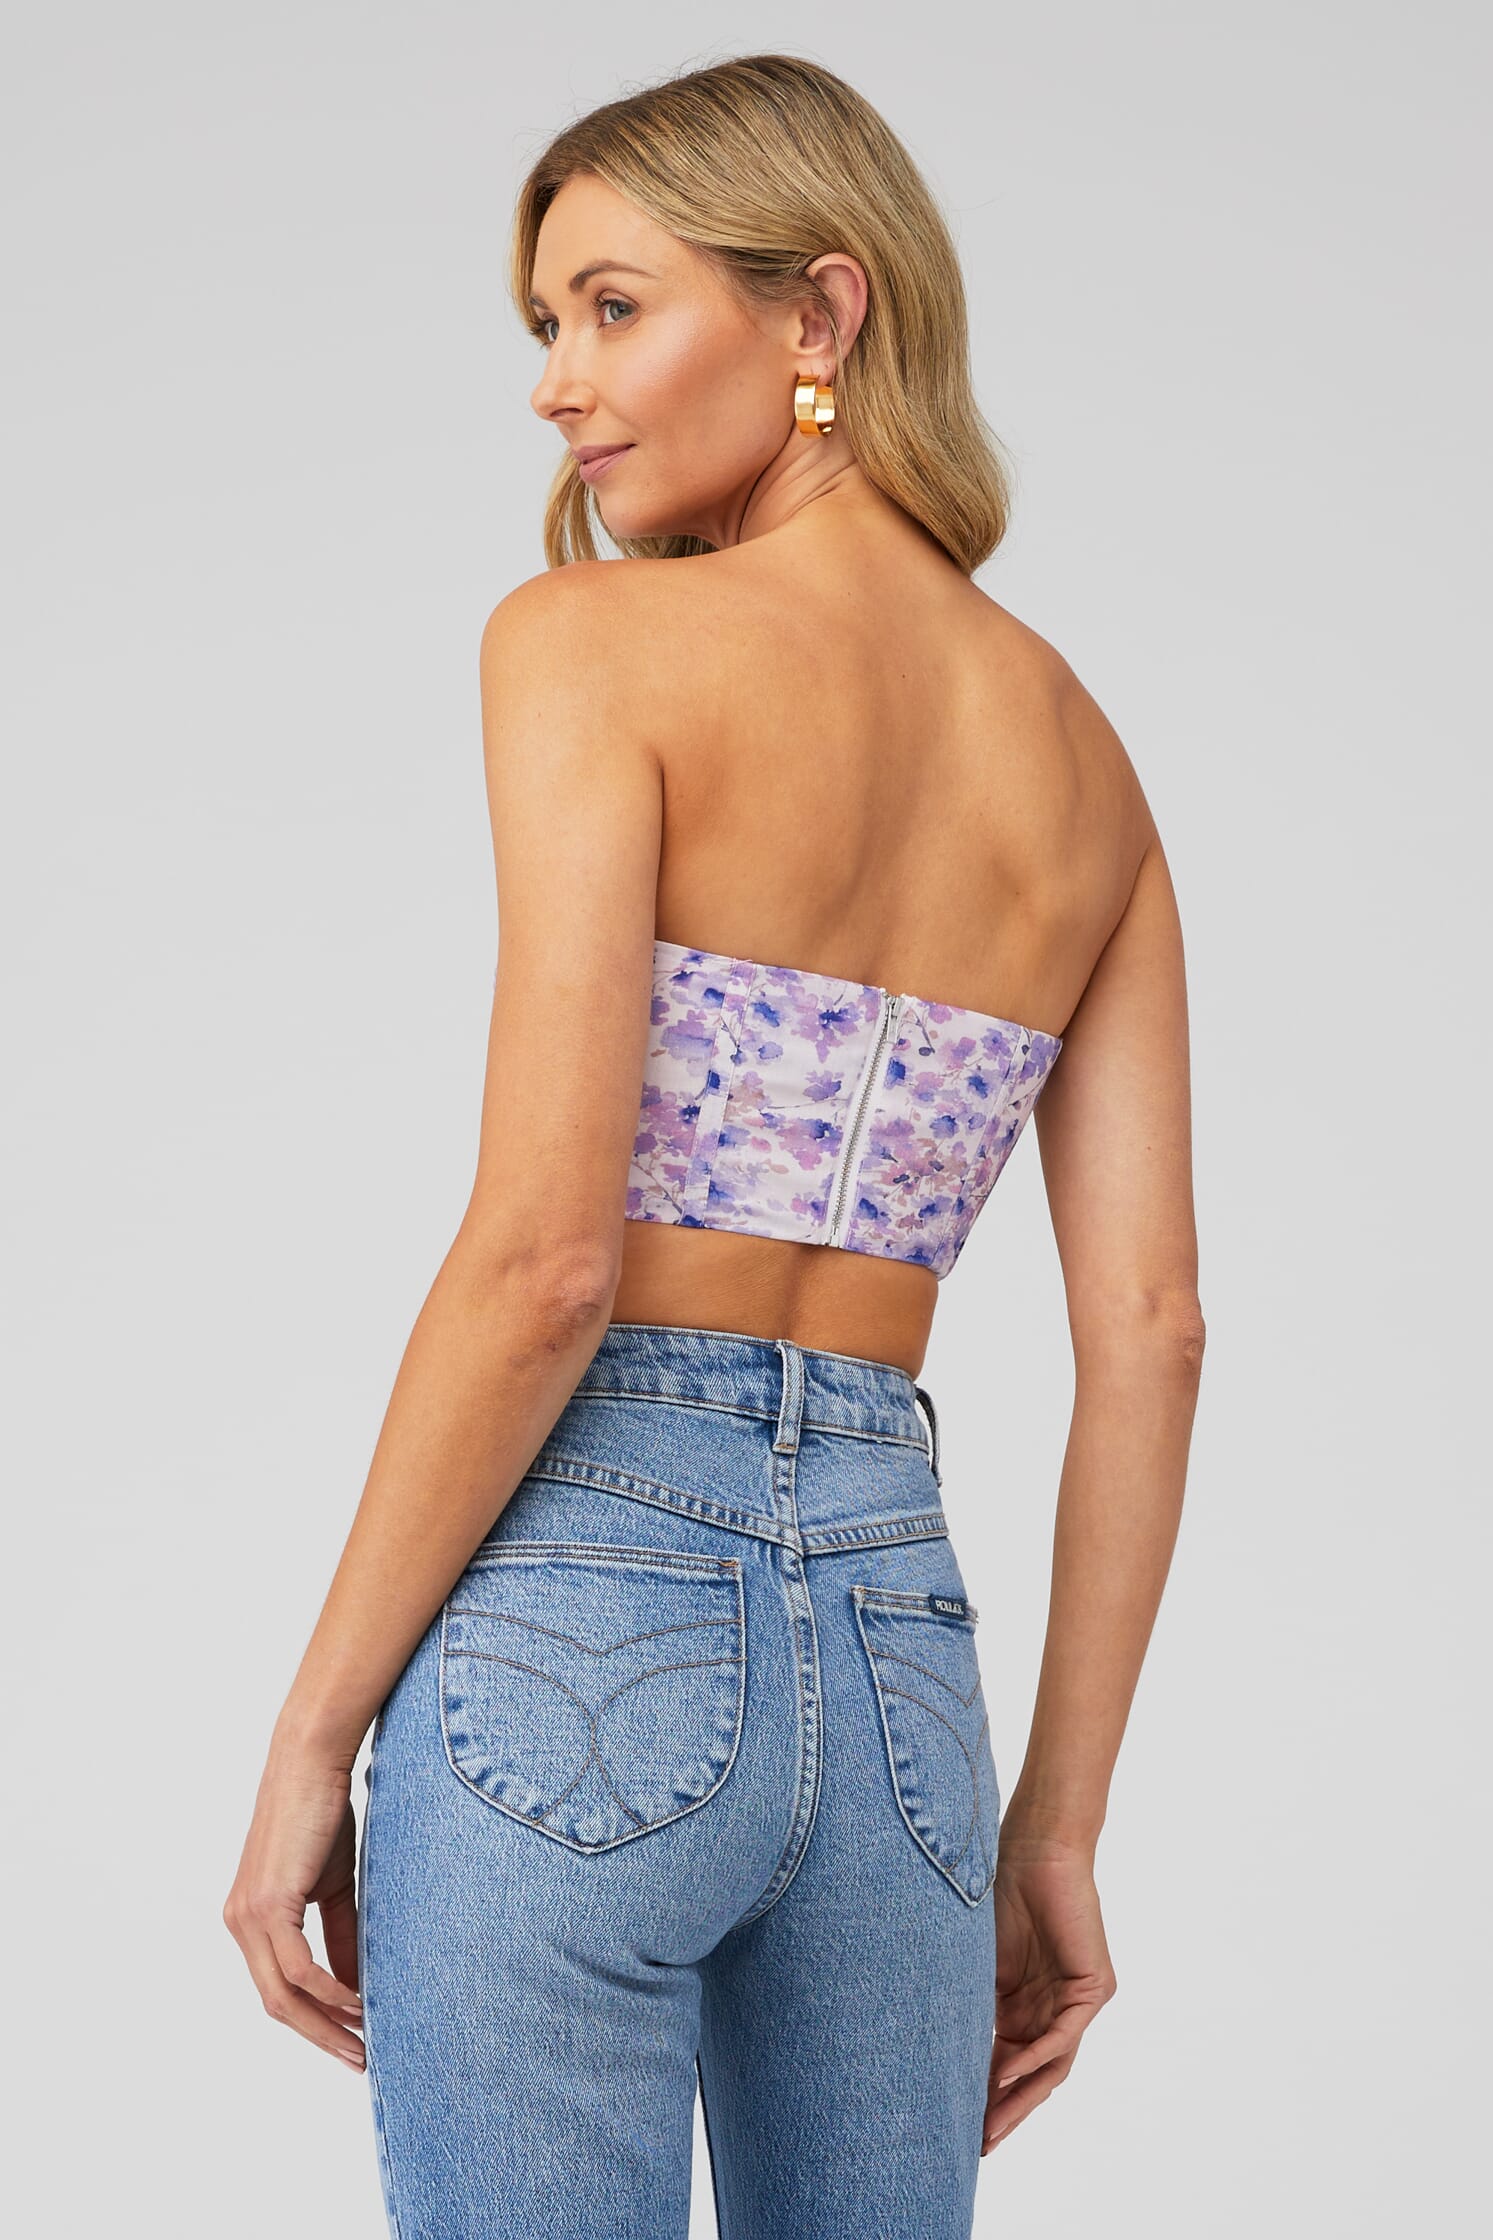 https://images.fashionpass.com/products/mirabelle-floral-bustier-bardot-lilac-floral-ebe-3.jpg?profile=a